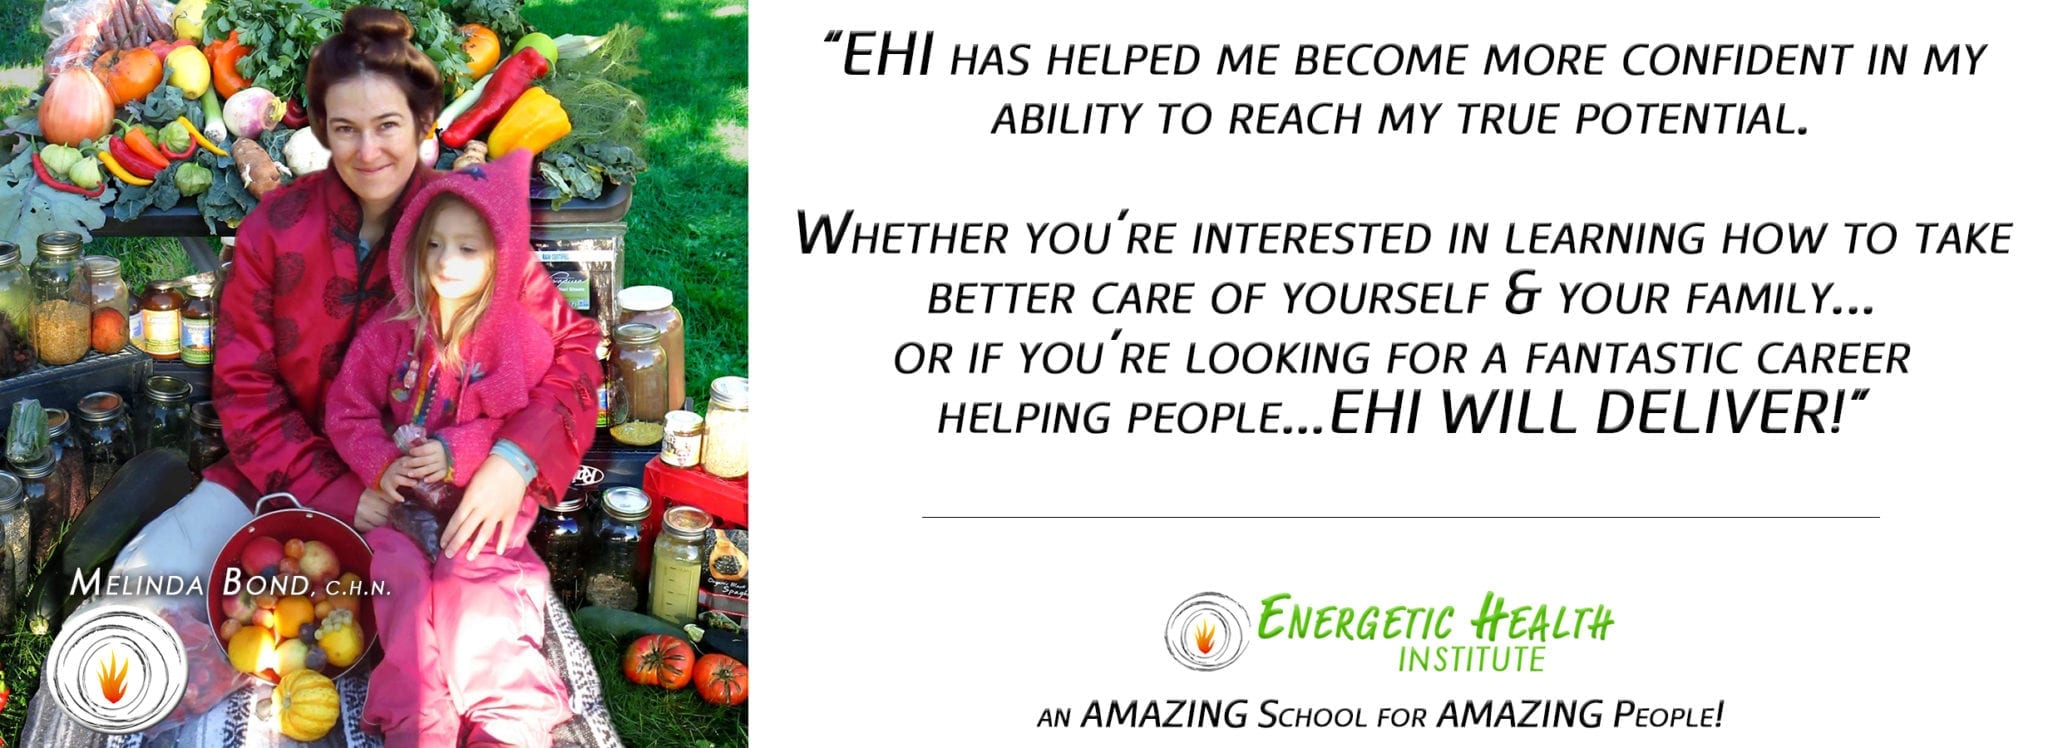 Dr. H Ealy Energetic Health Institute Holistic Nutrition Certification Nutritionist vs Dietitian